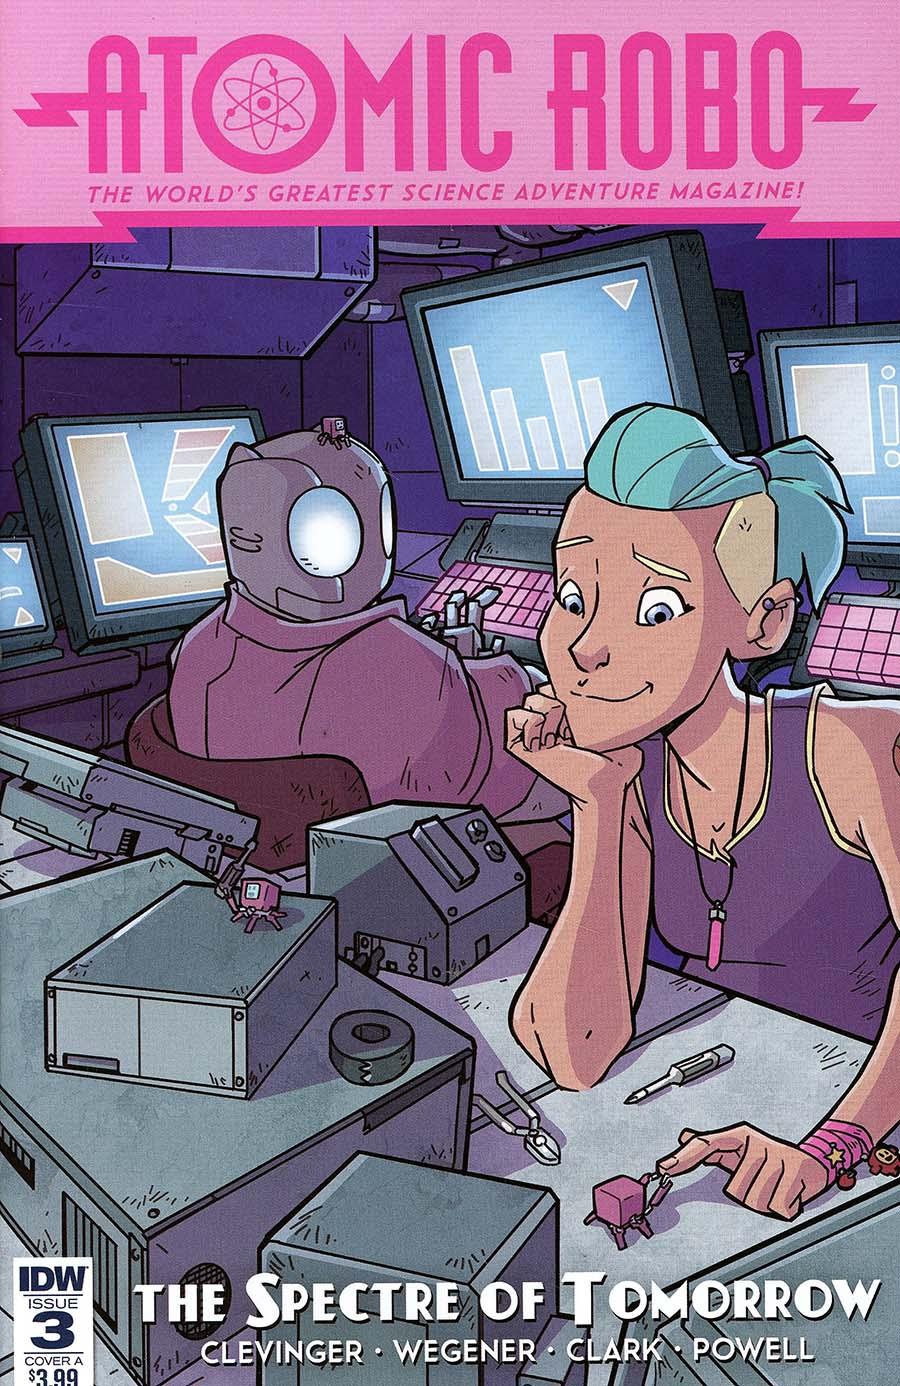 Atomic Robo And The Spectre Of Tomorrow Vol. 1 #3